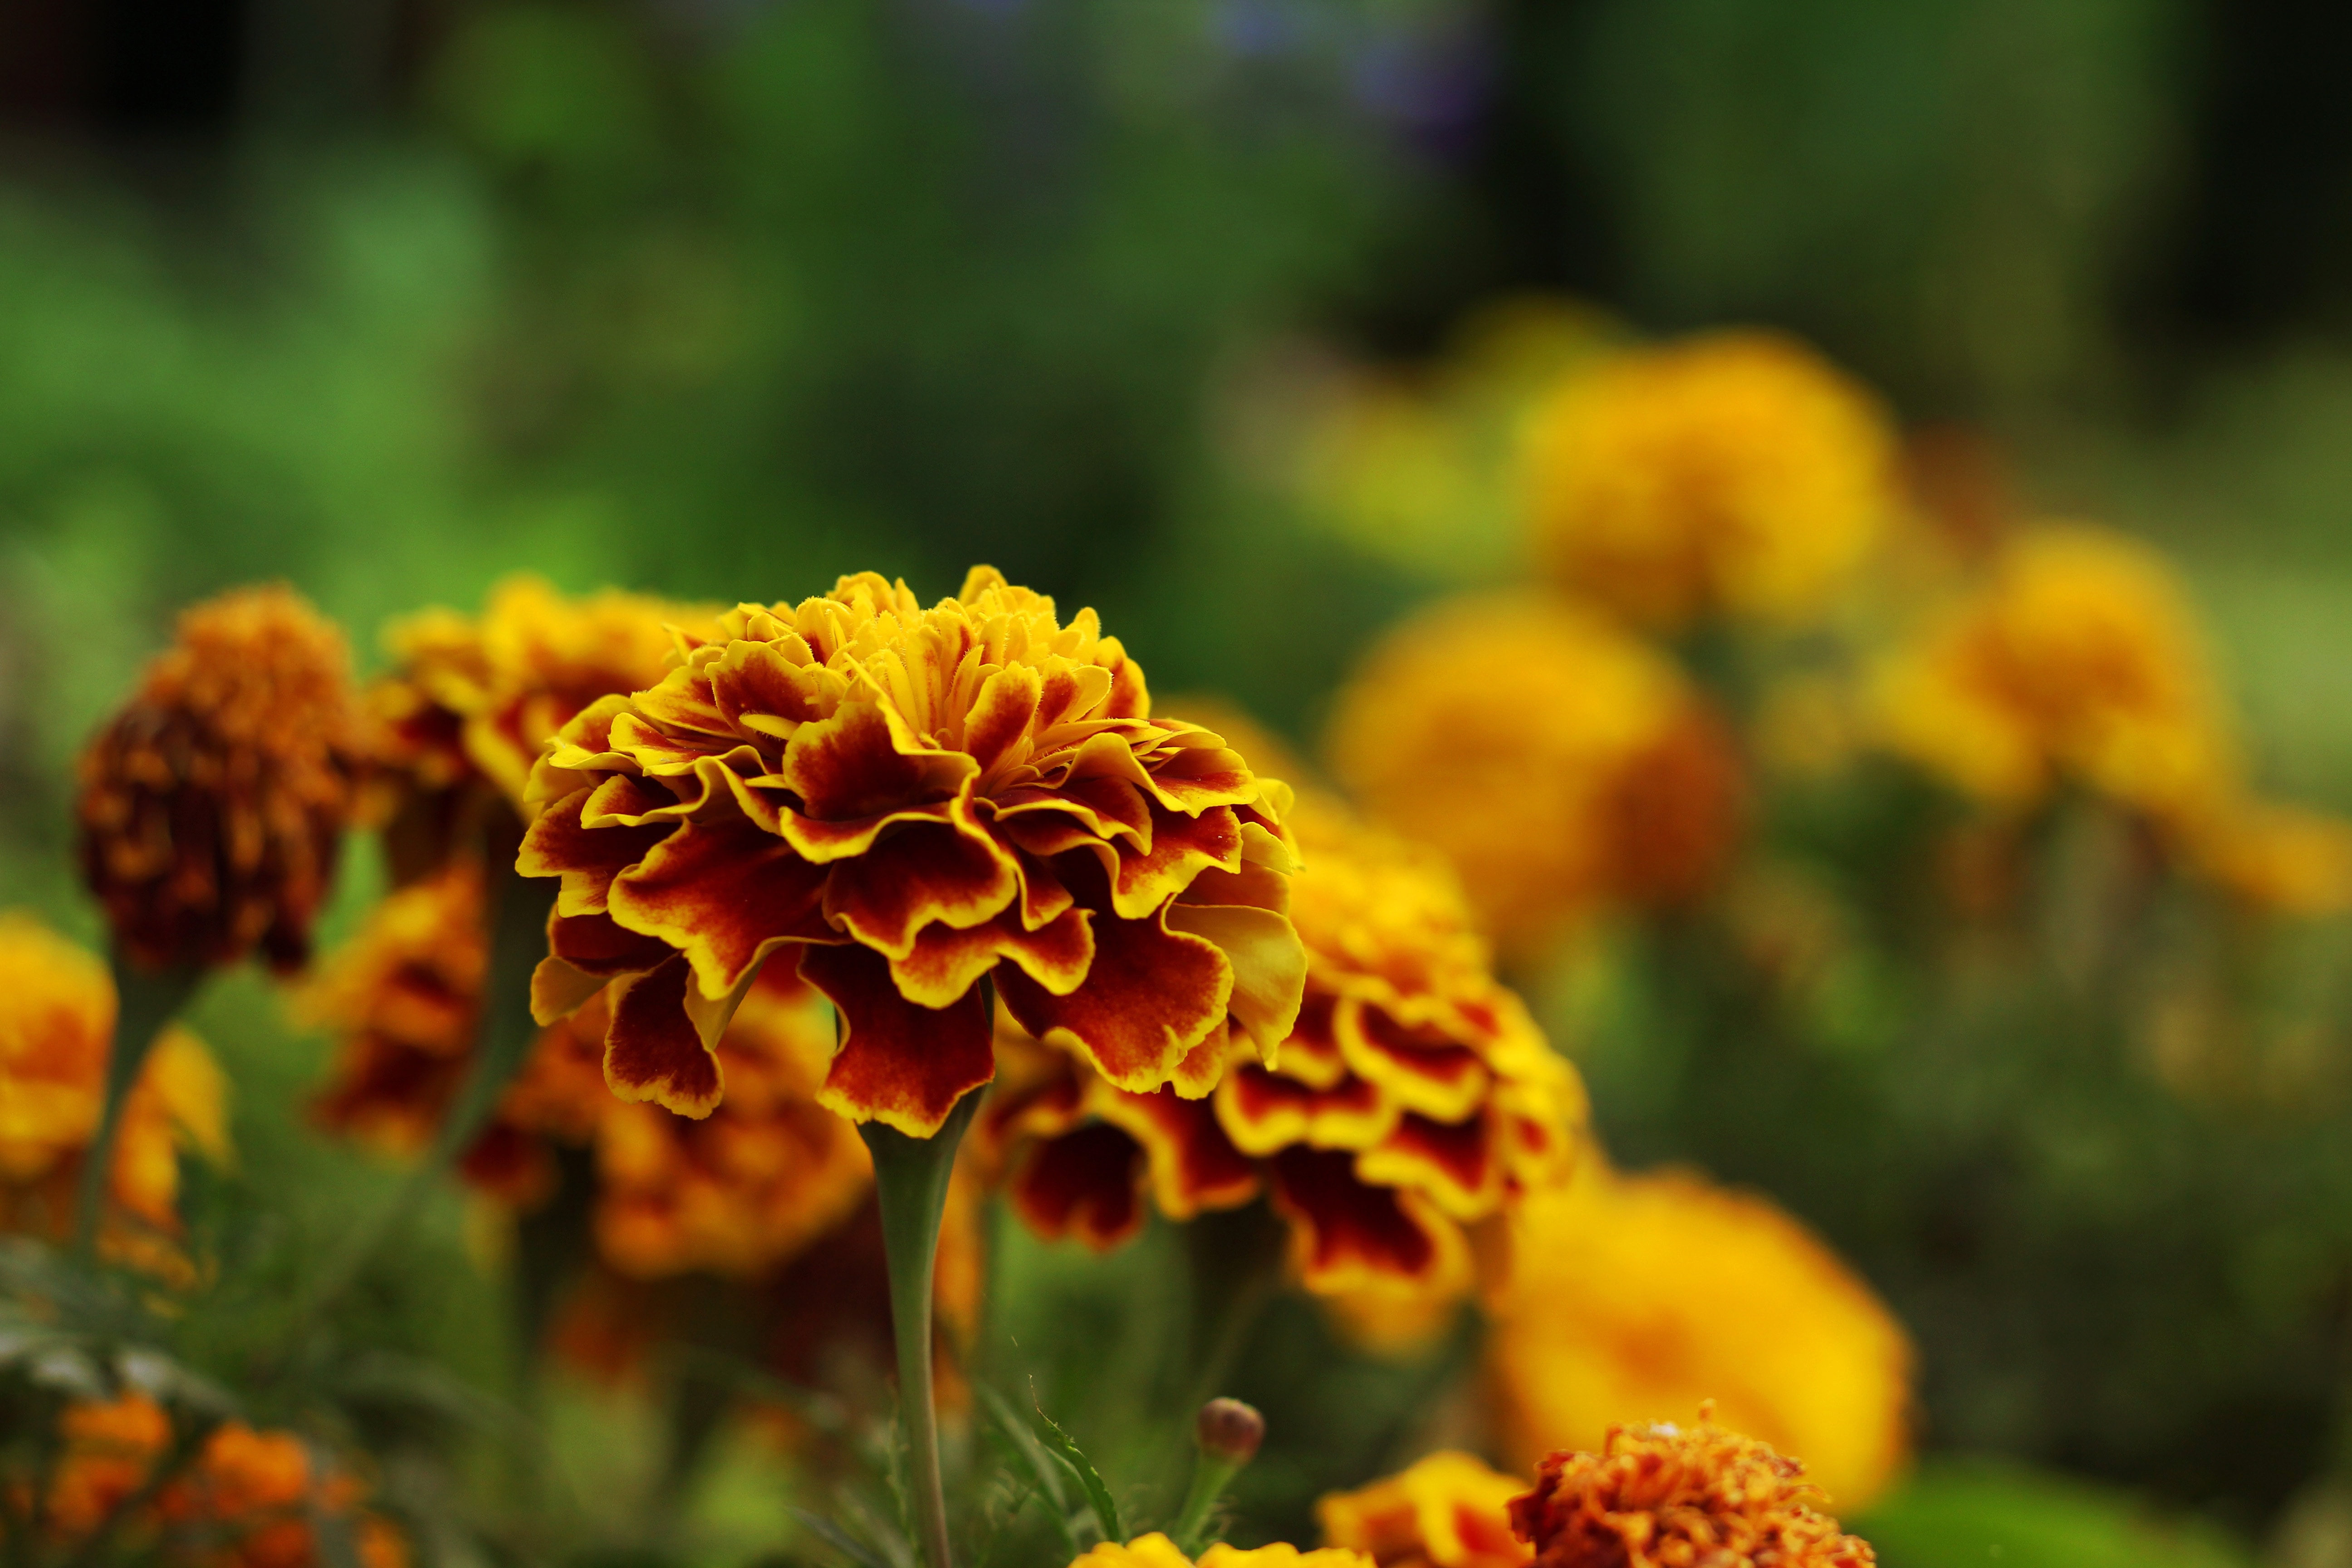 yellow and brown petaled flower